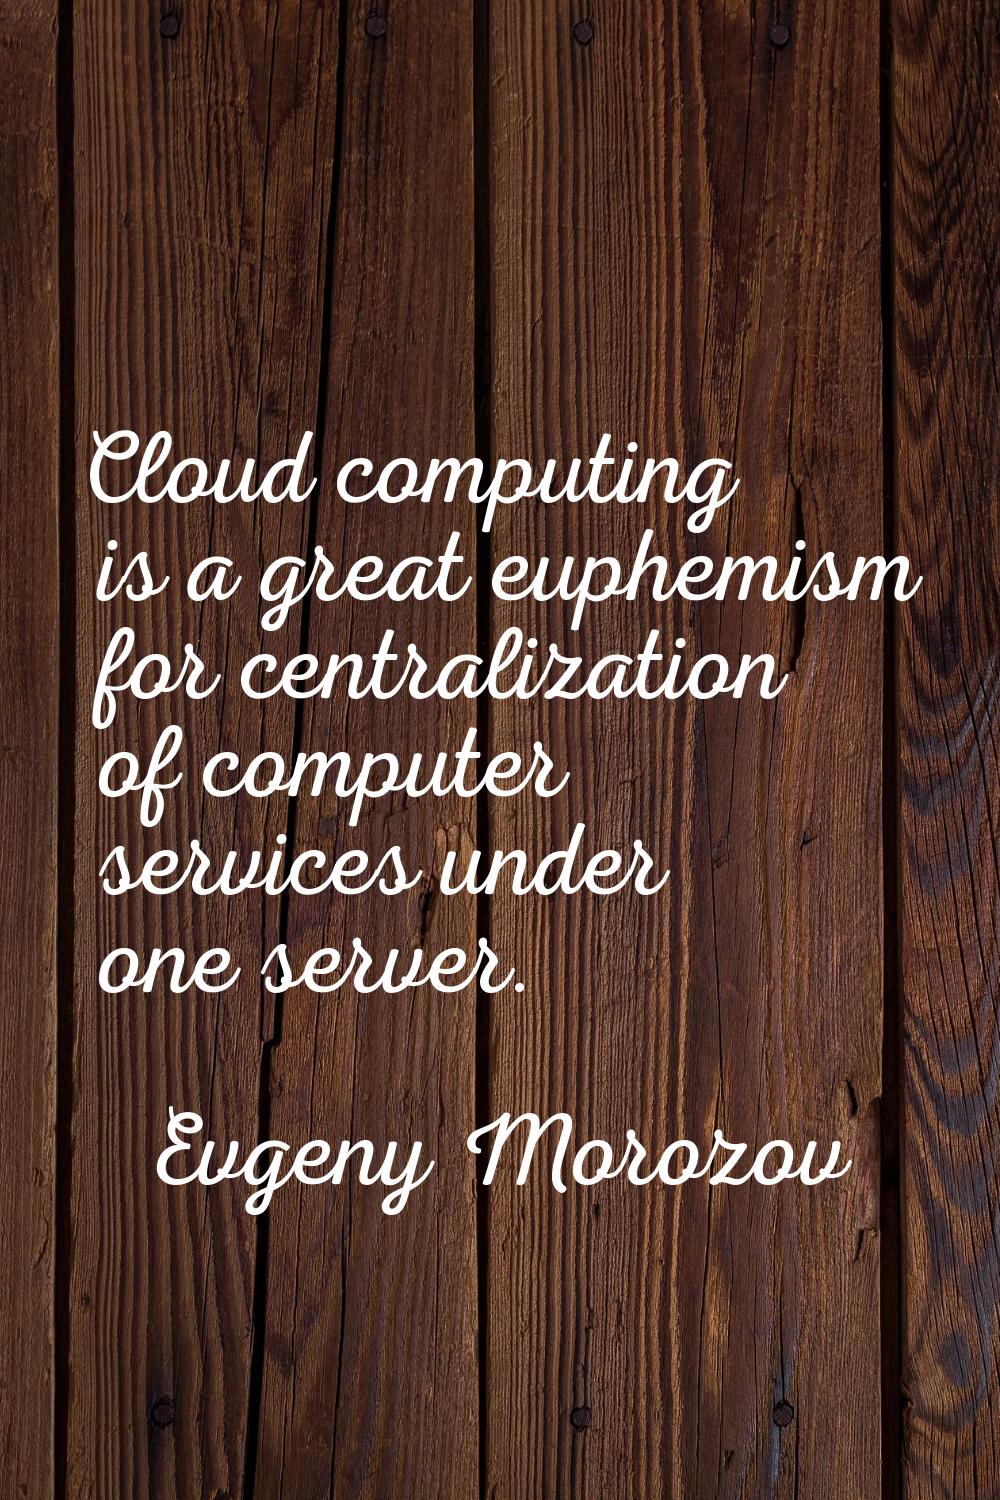 Cloud computing is a great euphemism for centralization of computer services under one server.